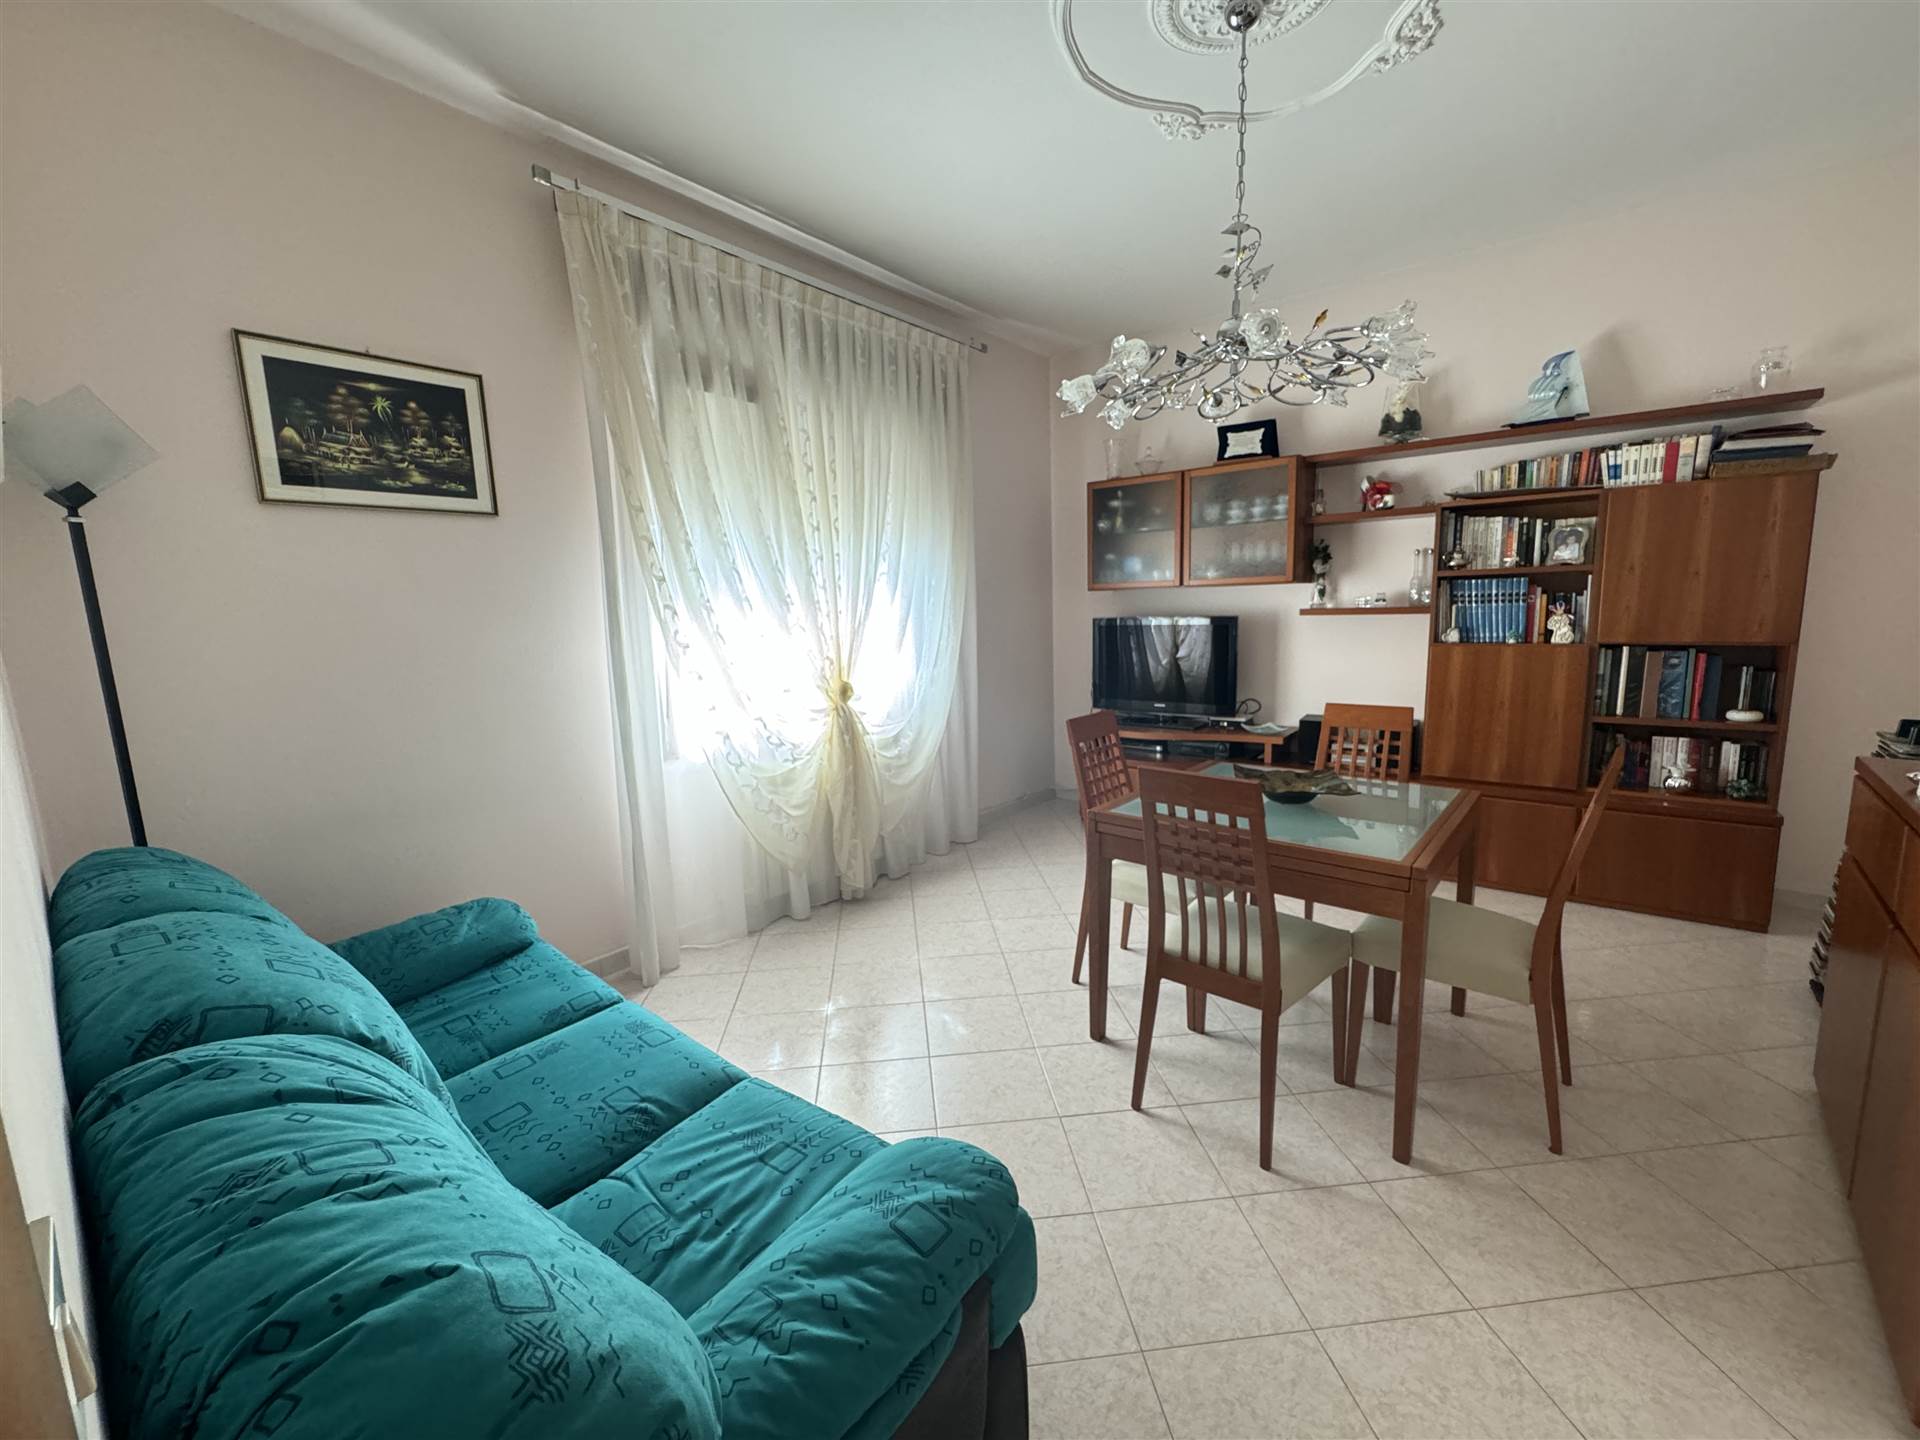 SOTTOMARINA, CHIOGGIA, Apartment for sale of 80 Sq. mt., Good condition, Heating Individual heating system, Energetic class: F, Epi: 171,84 kwh/m2 